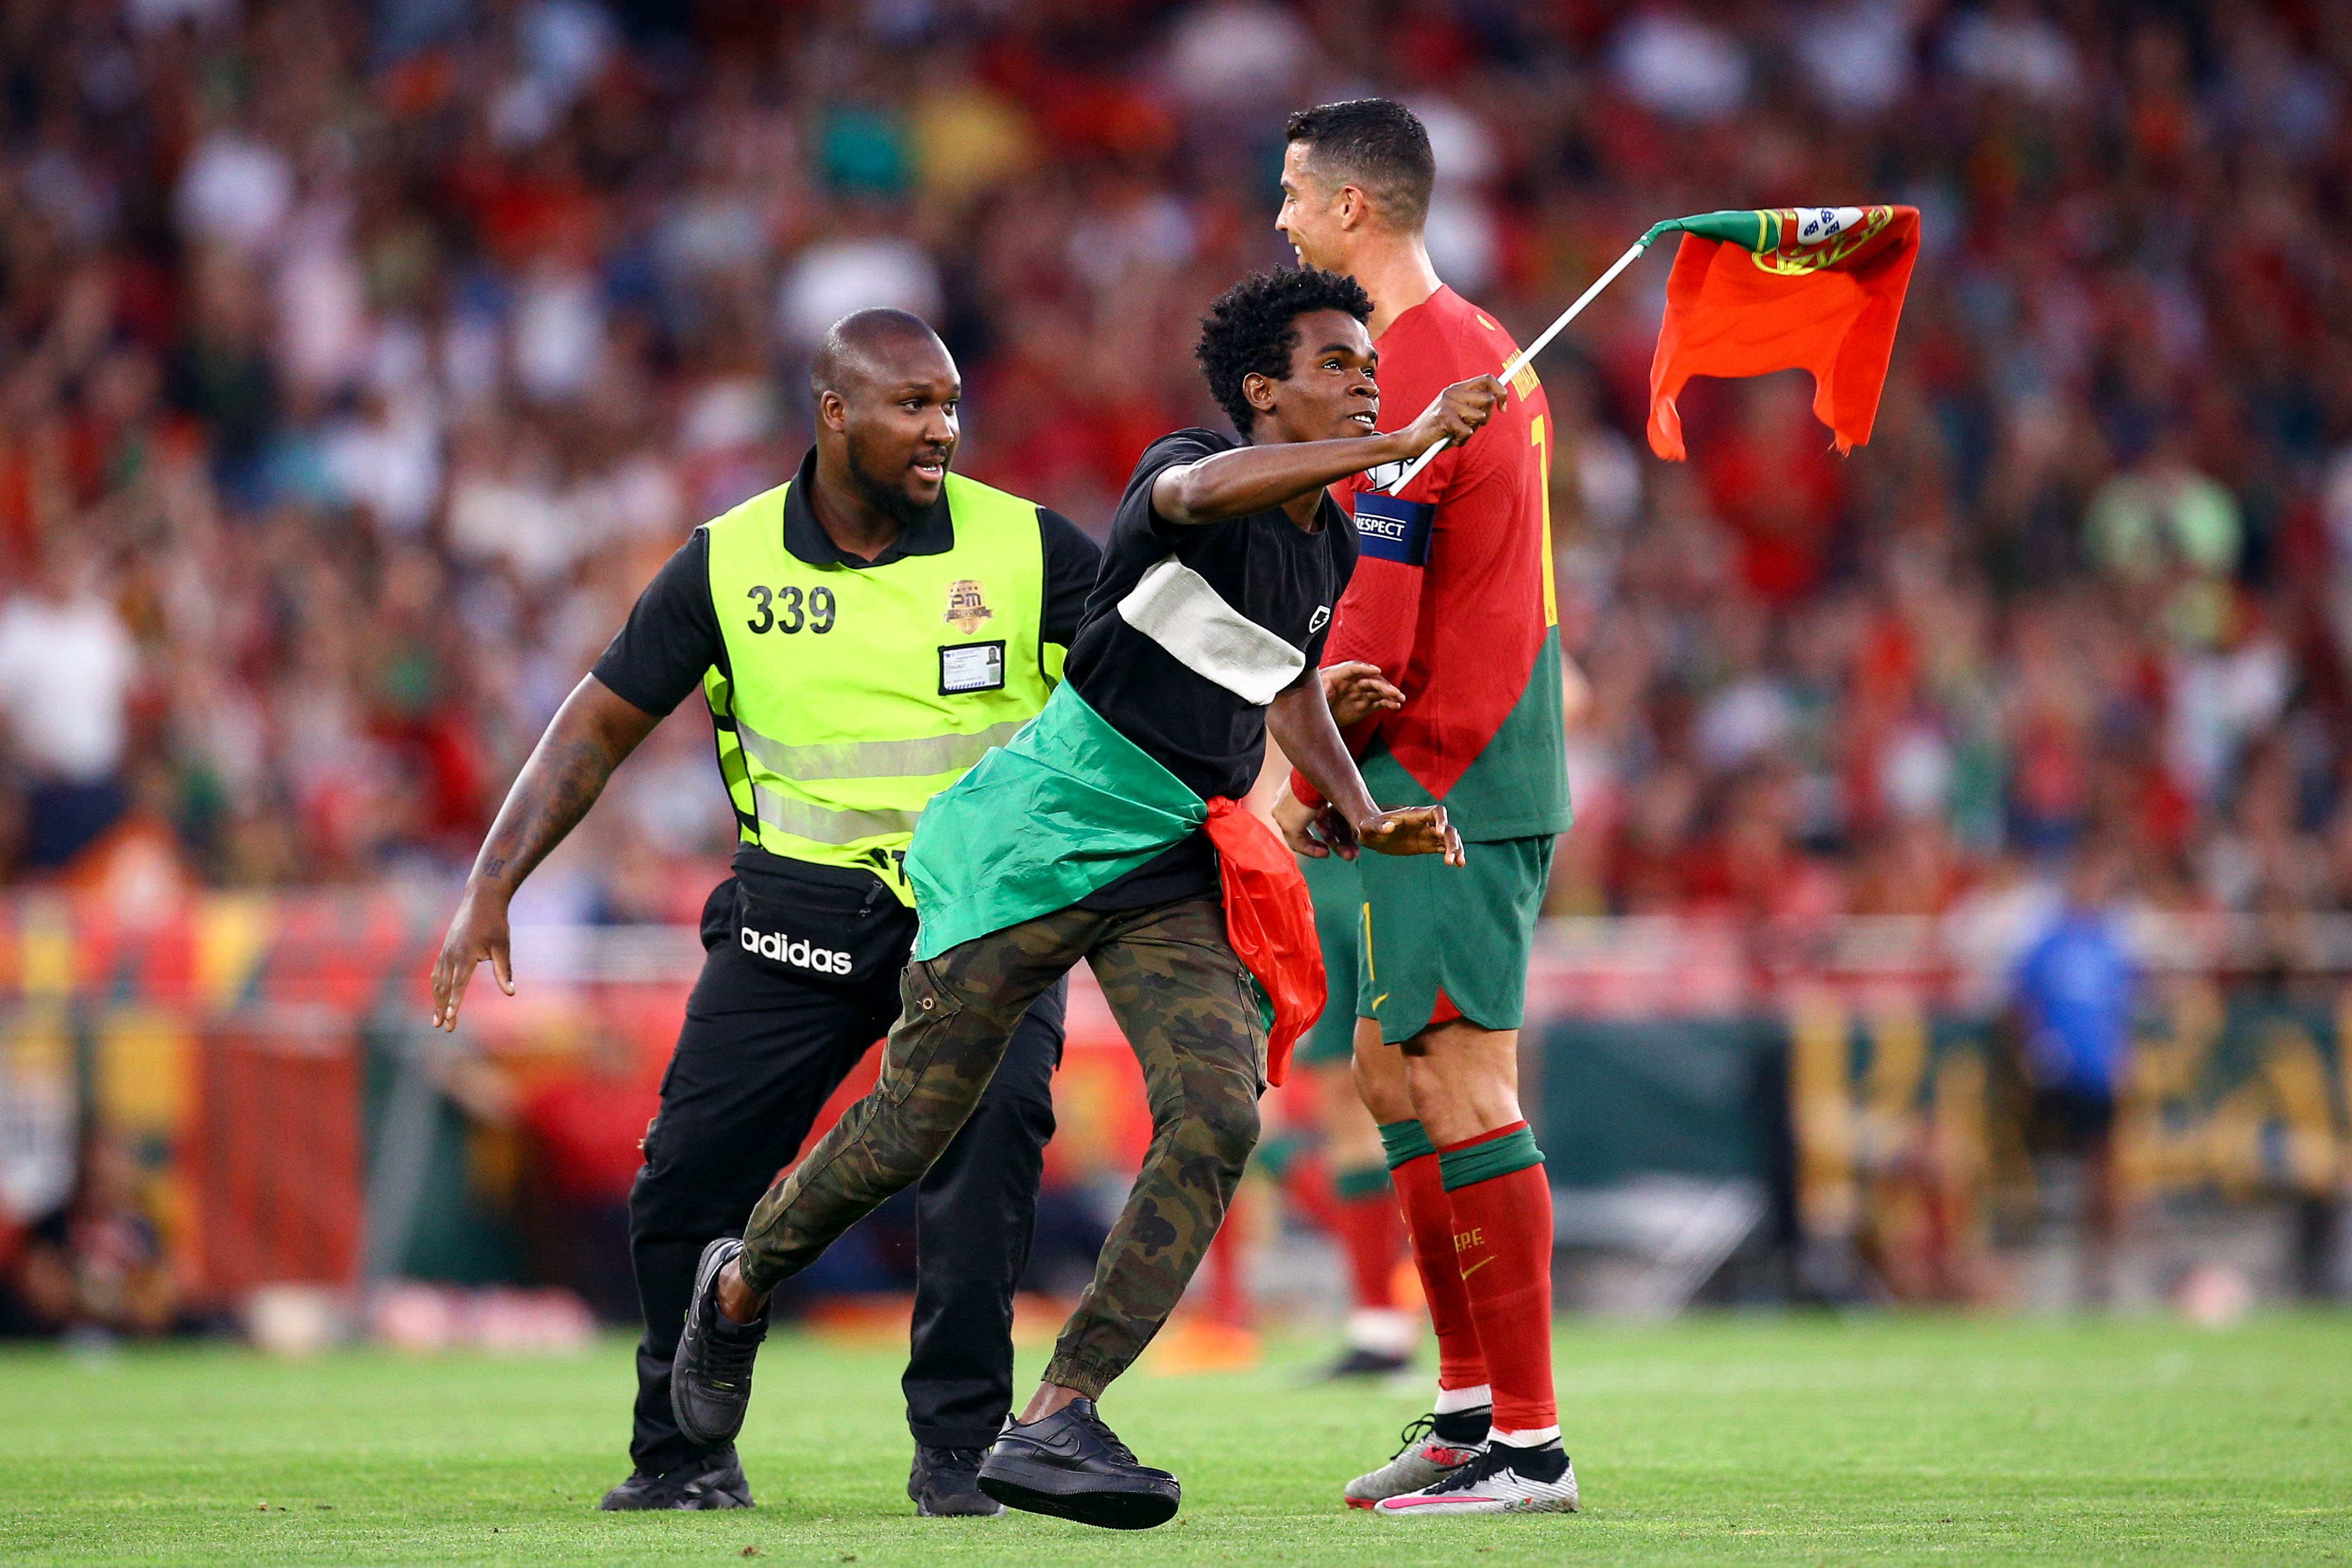 The Astonishing Moment When Ronaldo Was Lifted by a Pitch Intruder During Portugal's Euro Qualifier Against Bosnia 5